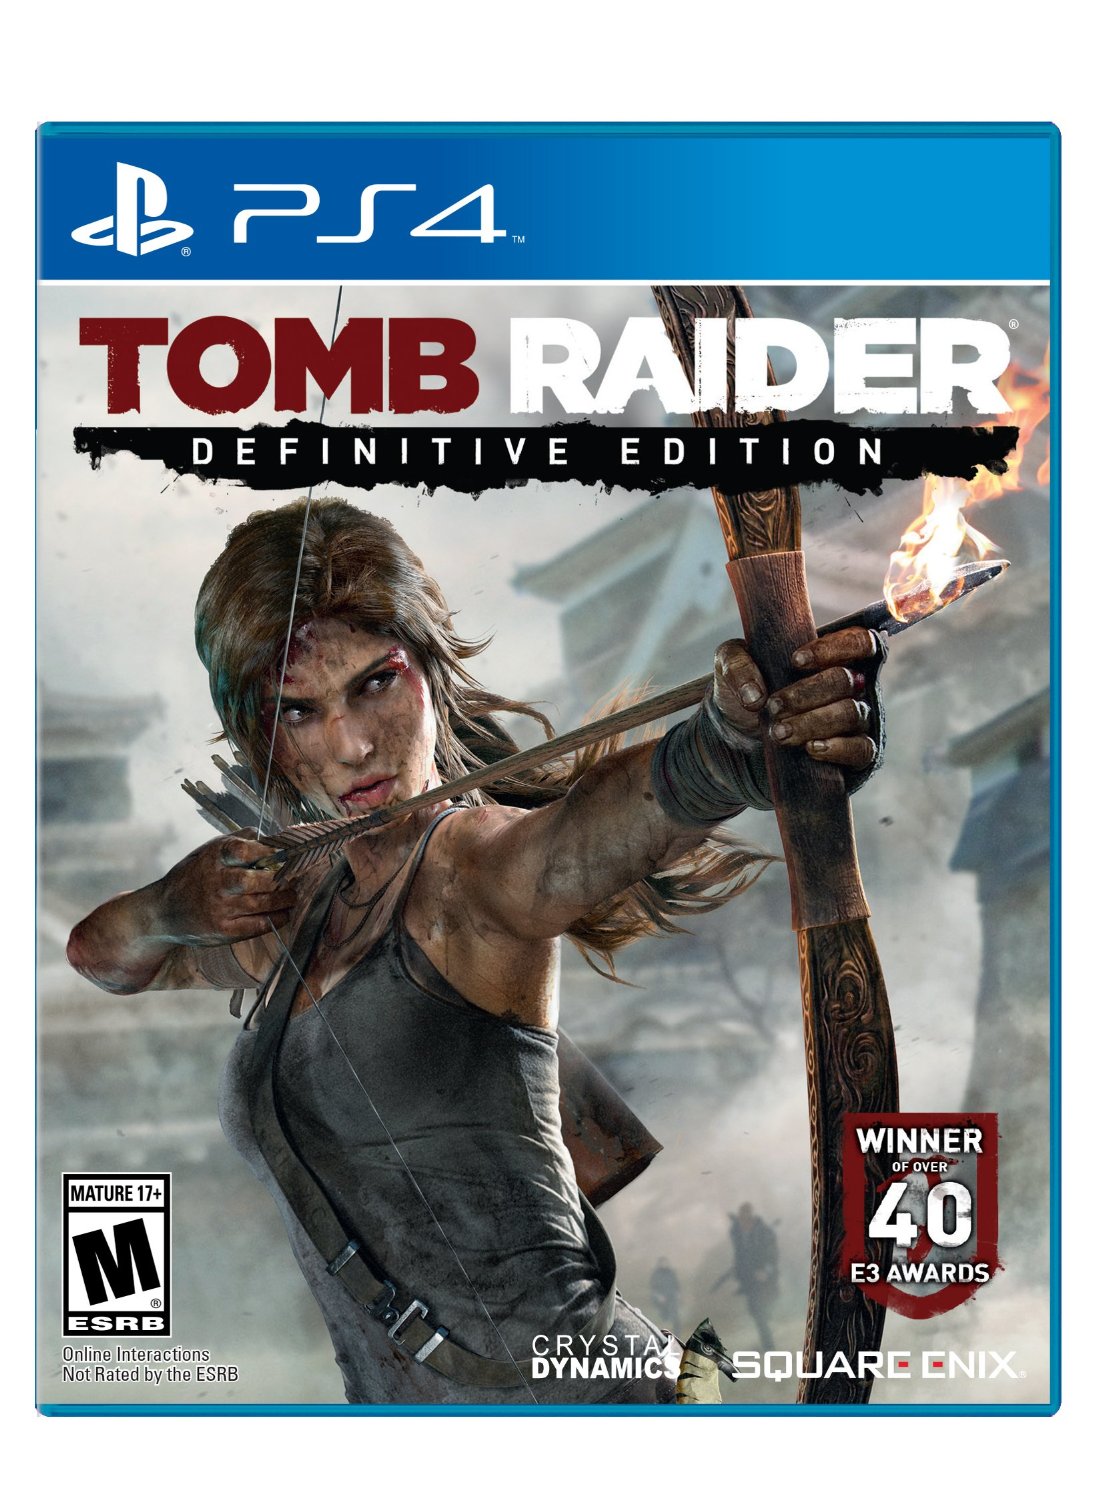 Tomb Raider: Definitive Edition (PS4) - The Cover Project